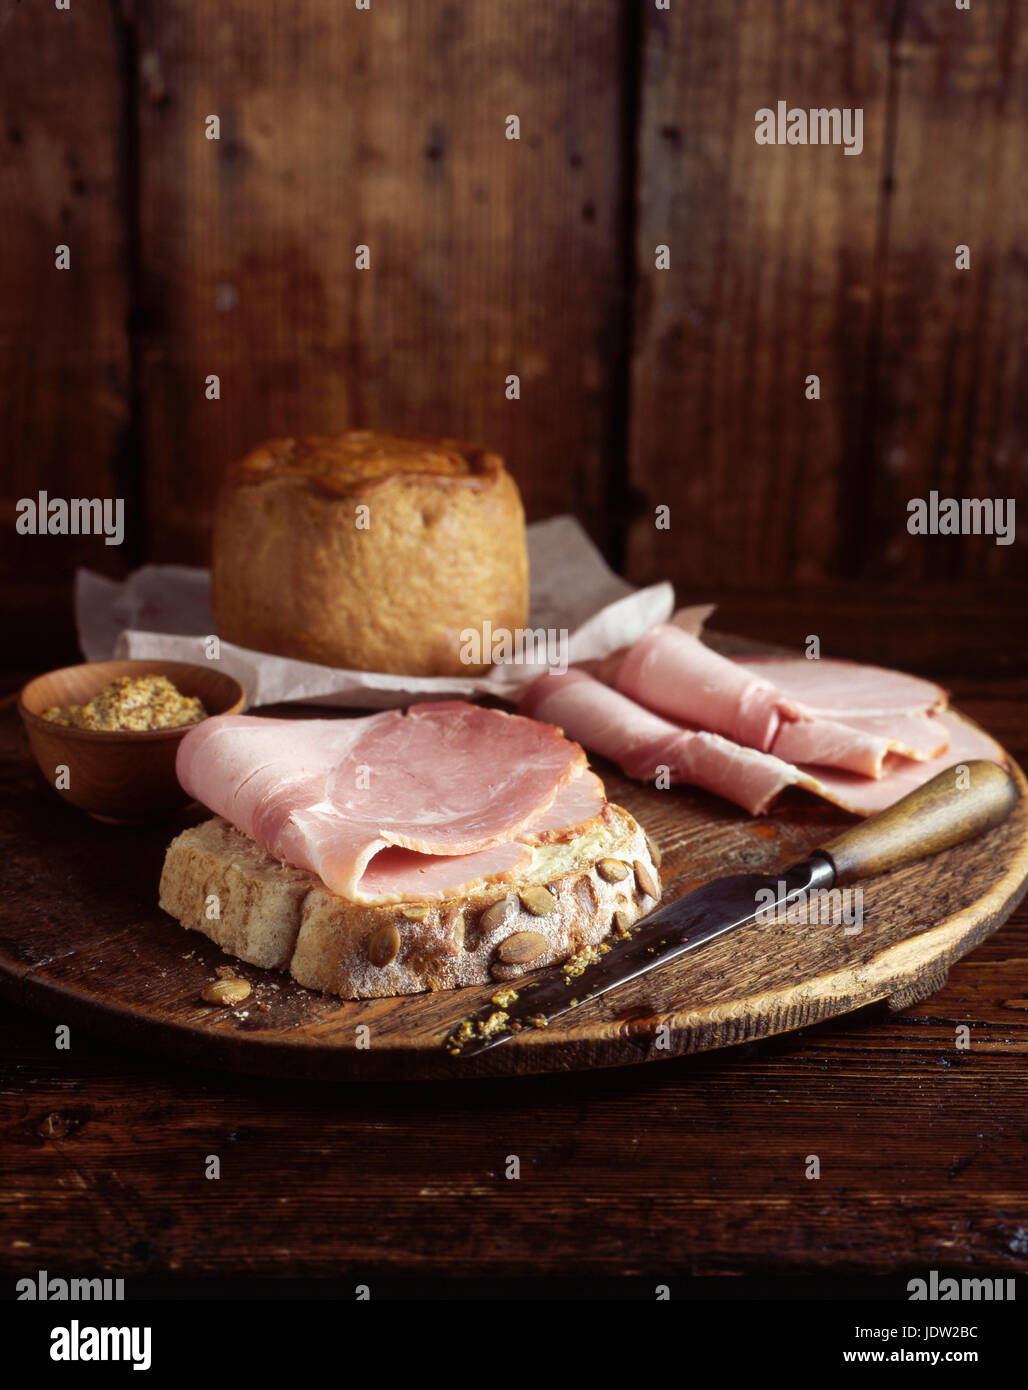 Plate of ham and bread Stock Photo